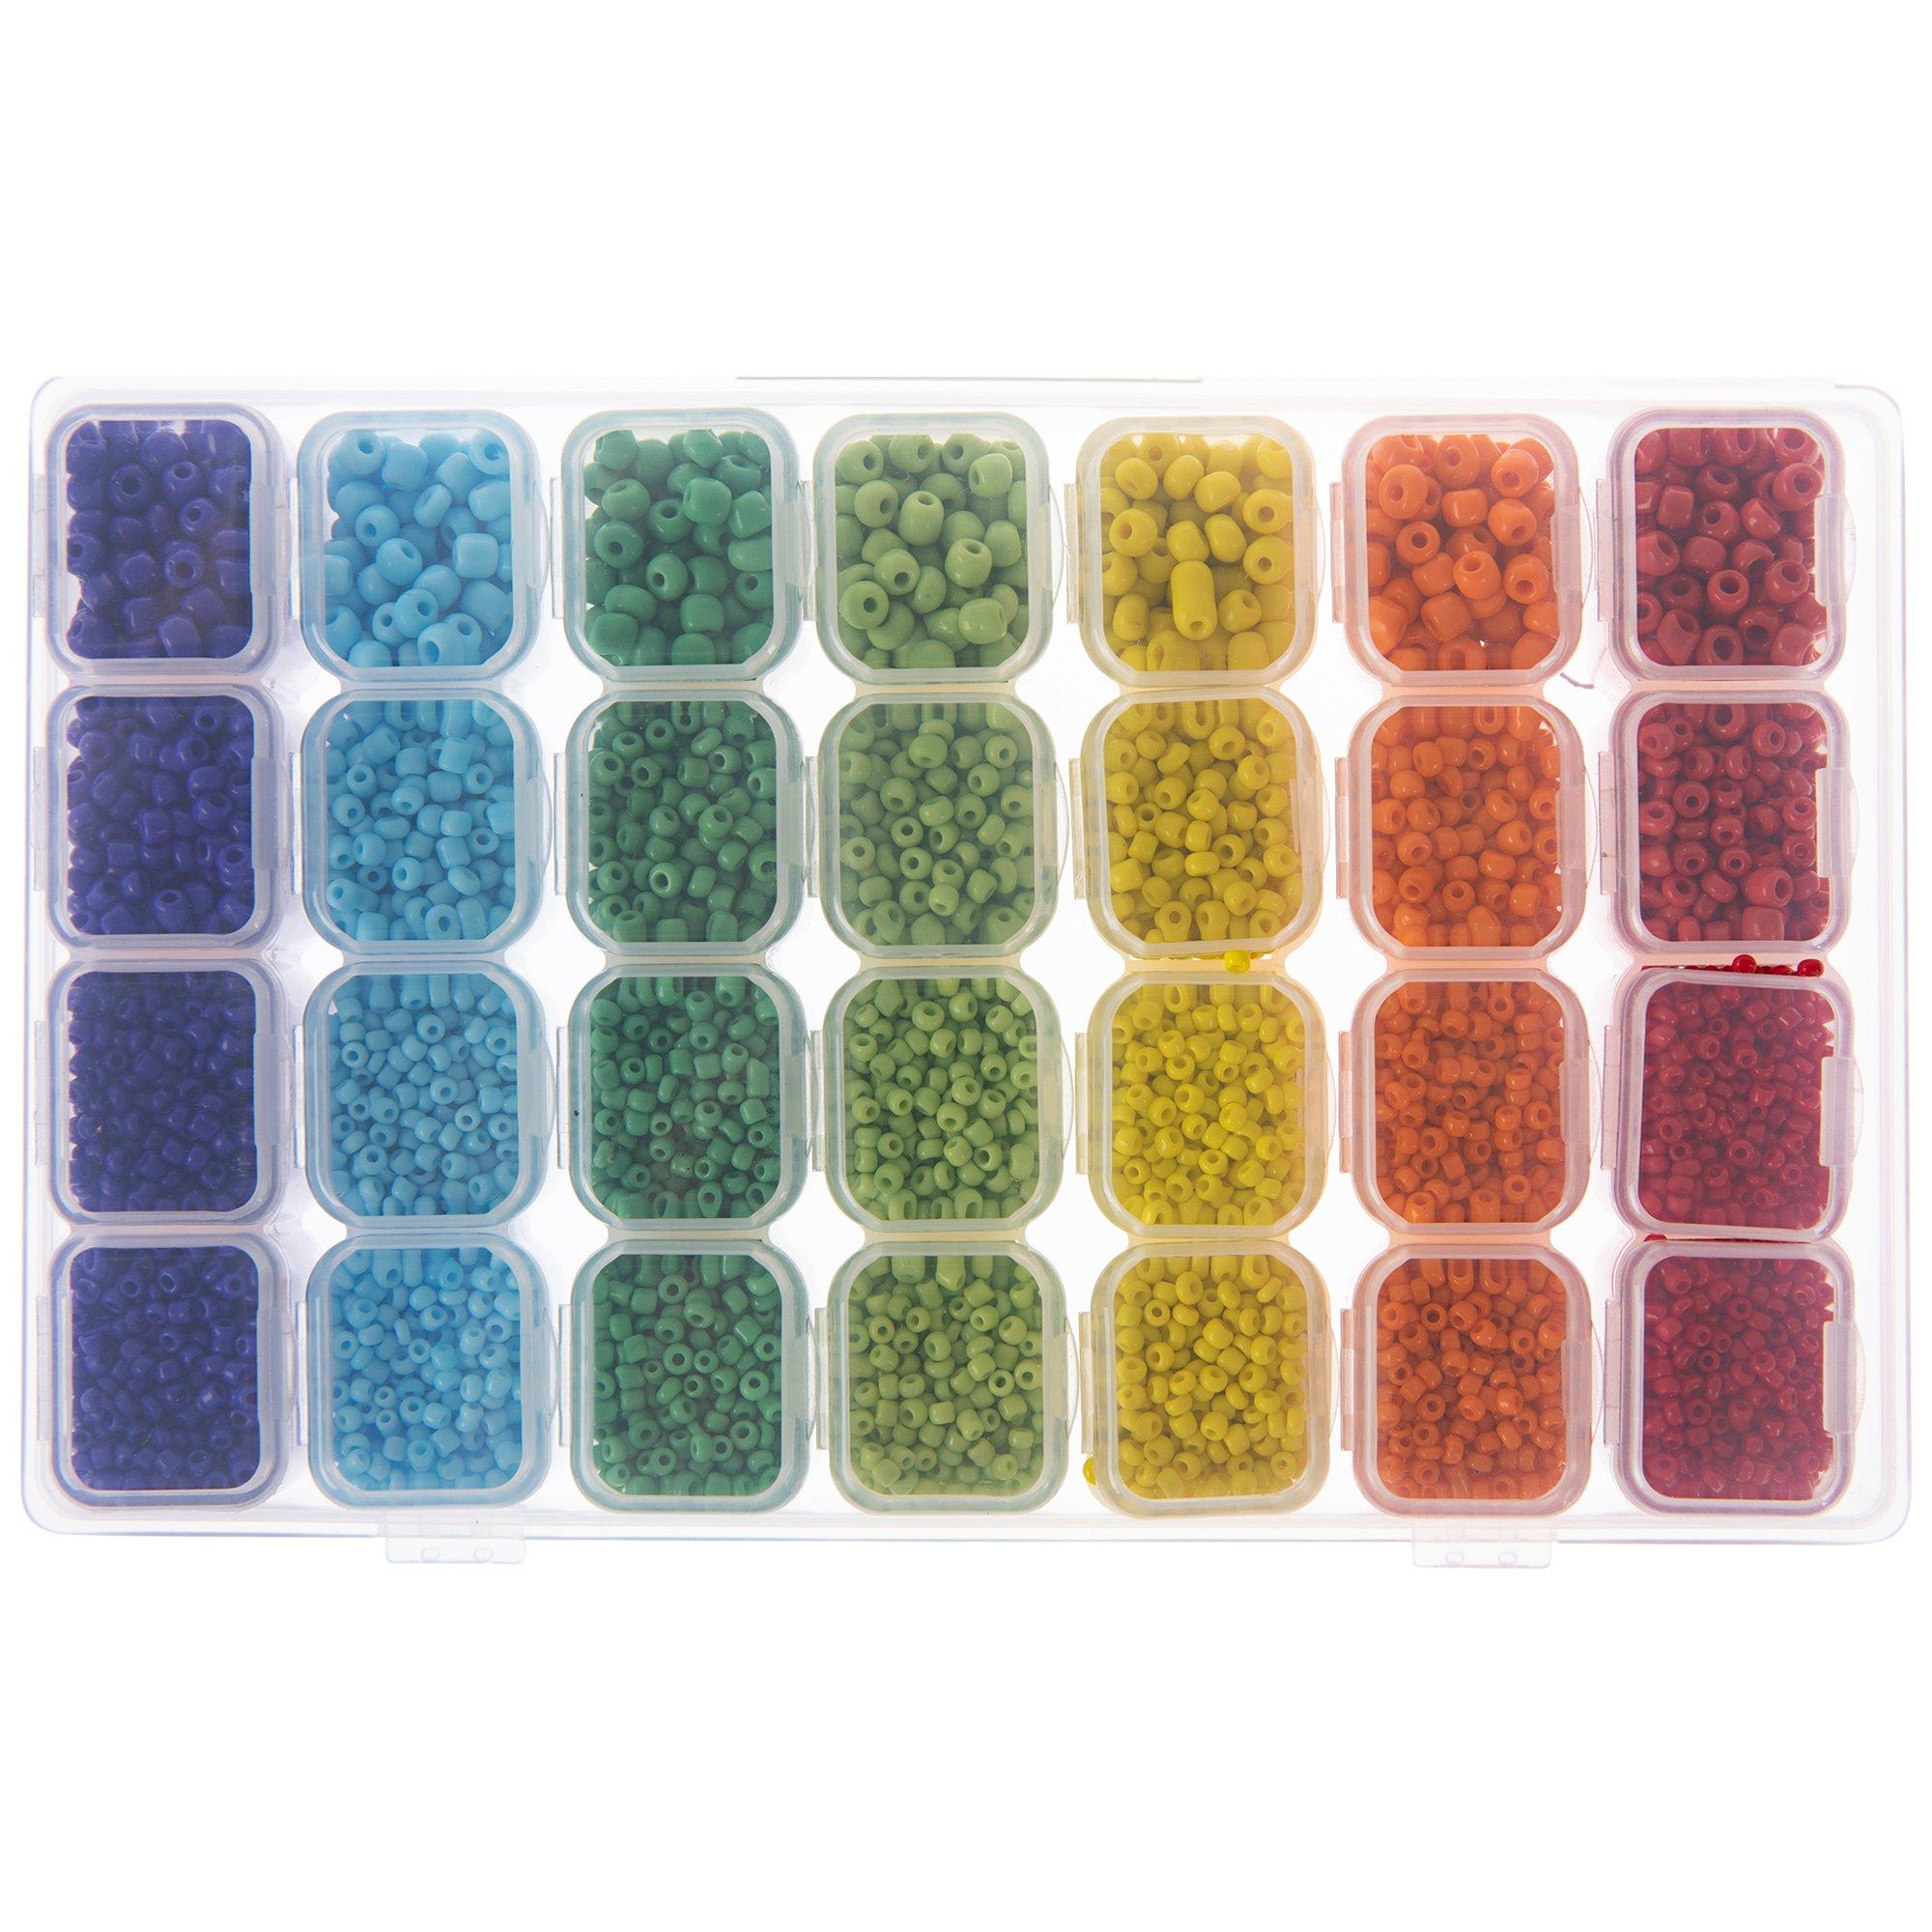 Bright Multi-Color Round Glass Seed Beads